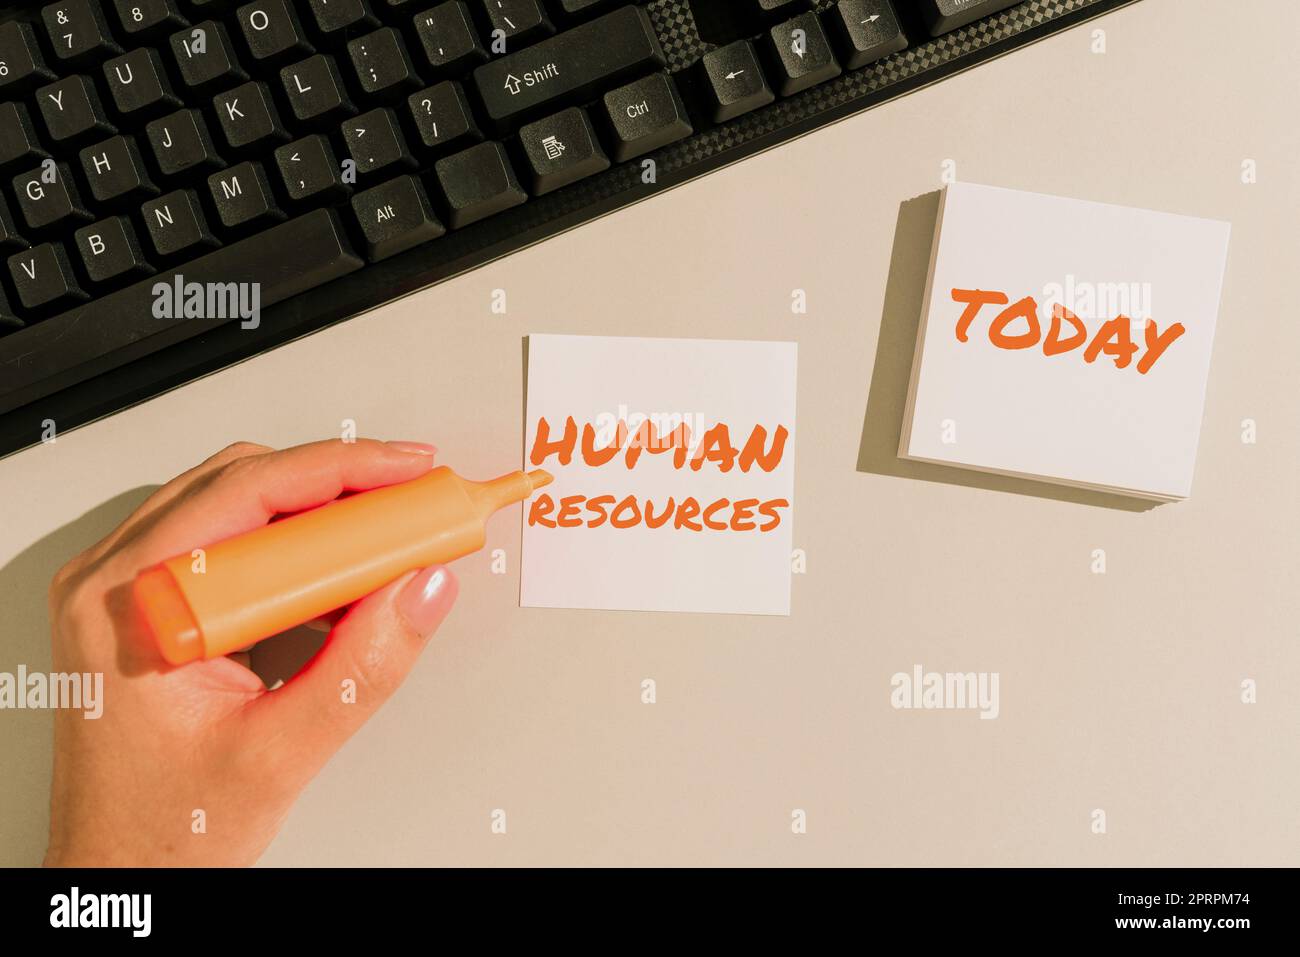 Sign displaying Human ResourcesThe people who make up the workforce of an organization. Business overview The showing who make up the workforce of an organization Stock Photo